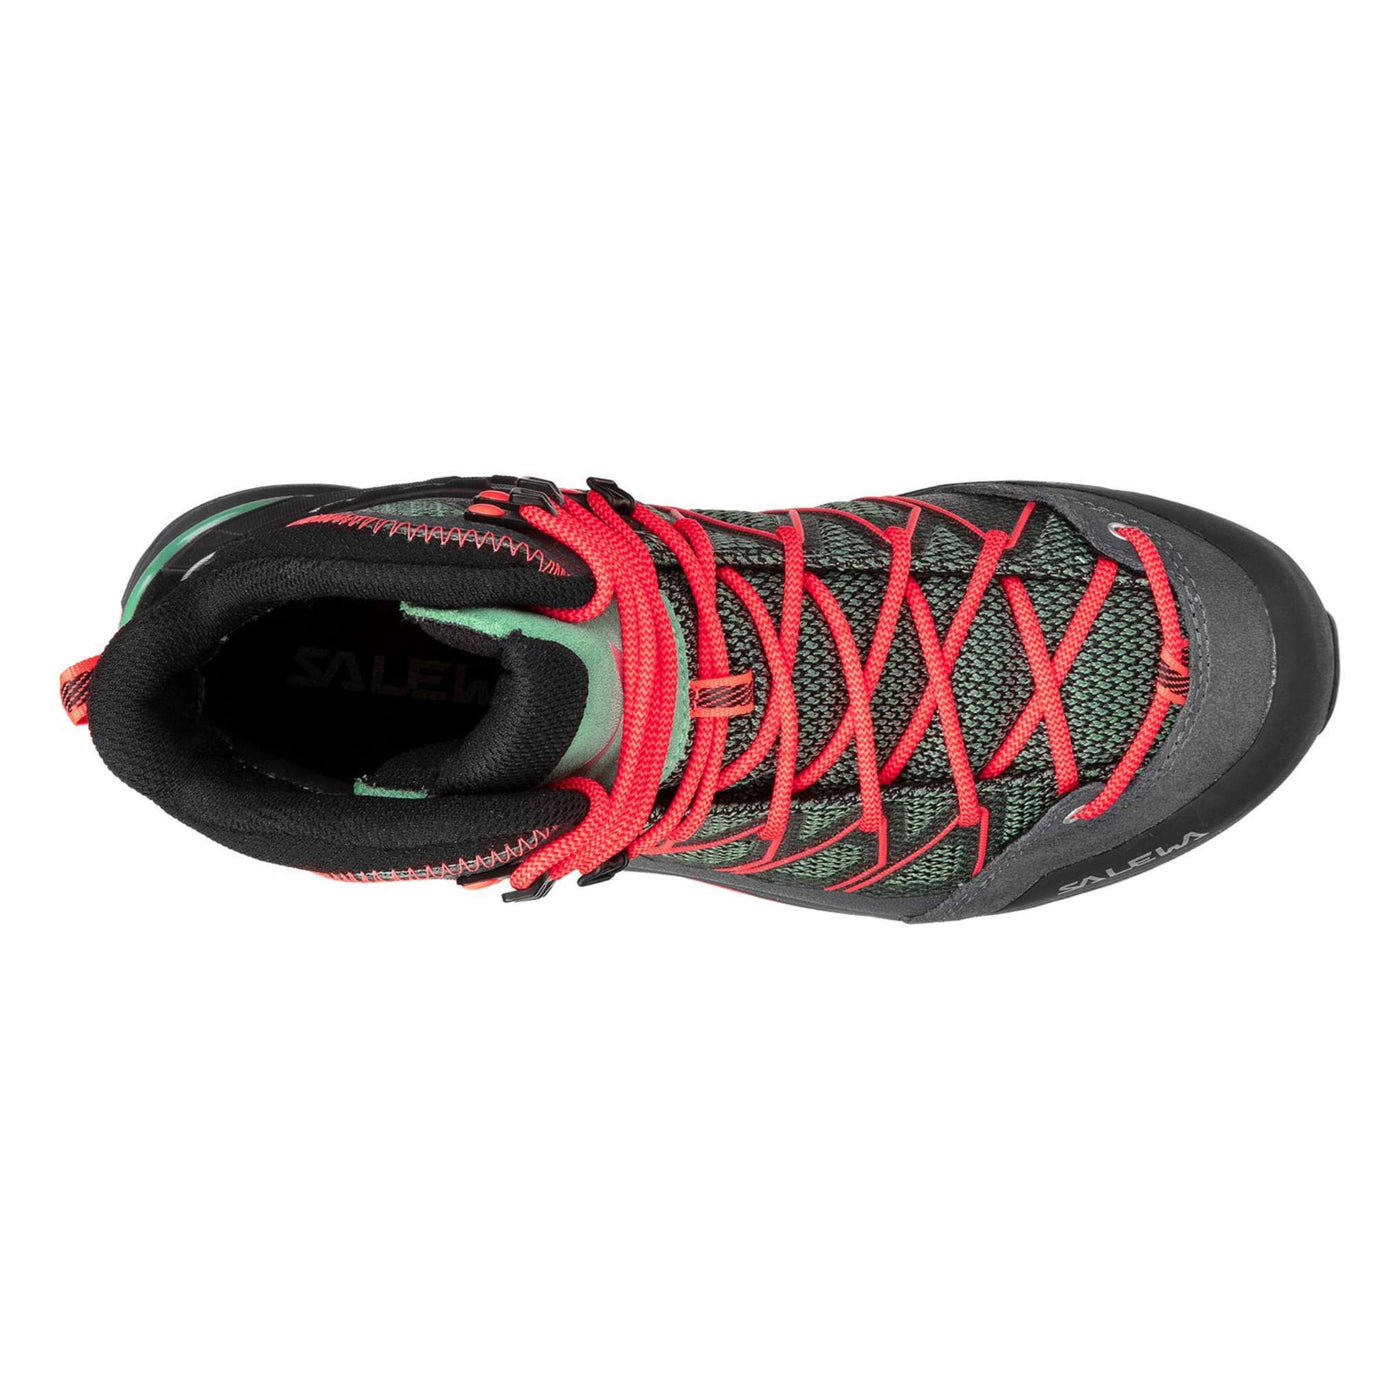 Salewa Mountain Trainer Lite Mid Gore-Tex Womens | Lightweight Hiking Boots | Further Faster Christchurch NZ #feld-green-fluo-coral